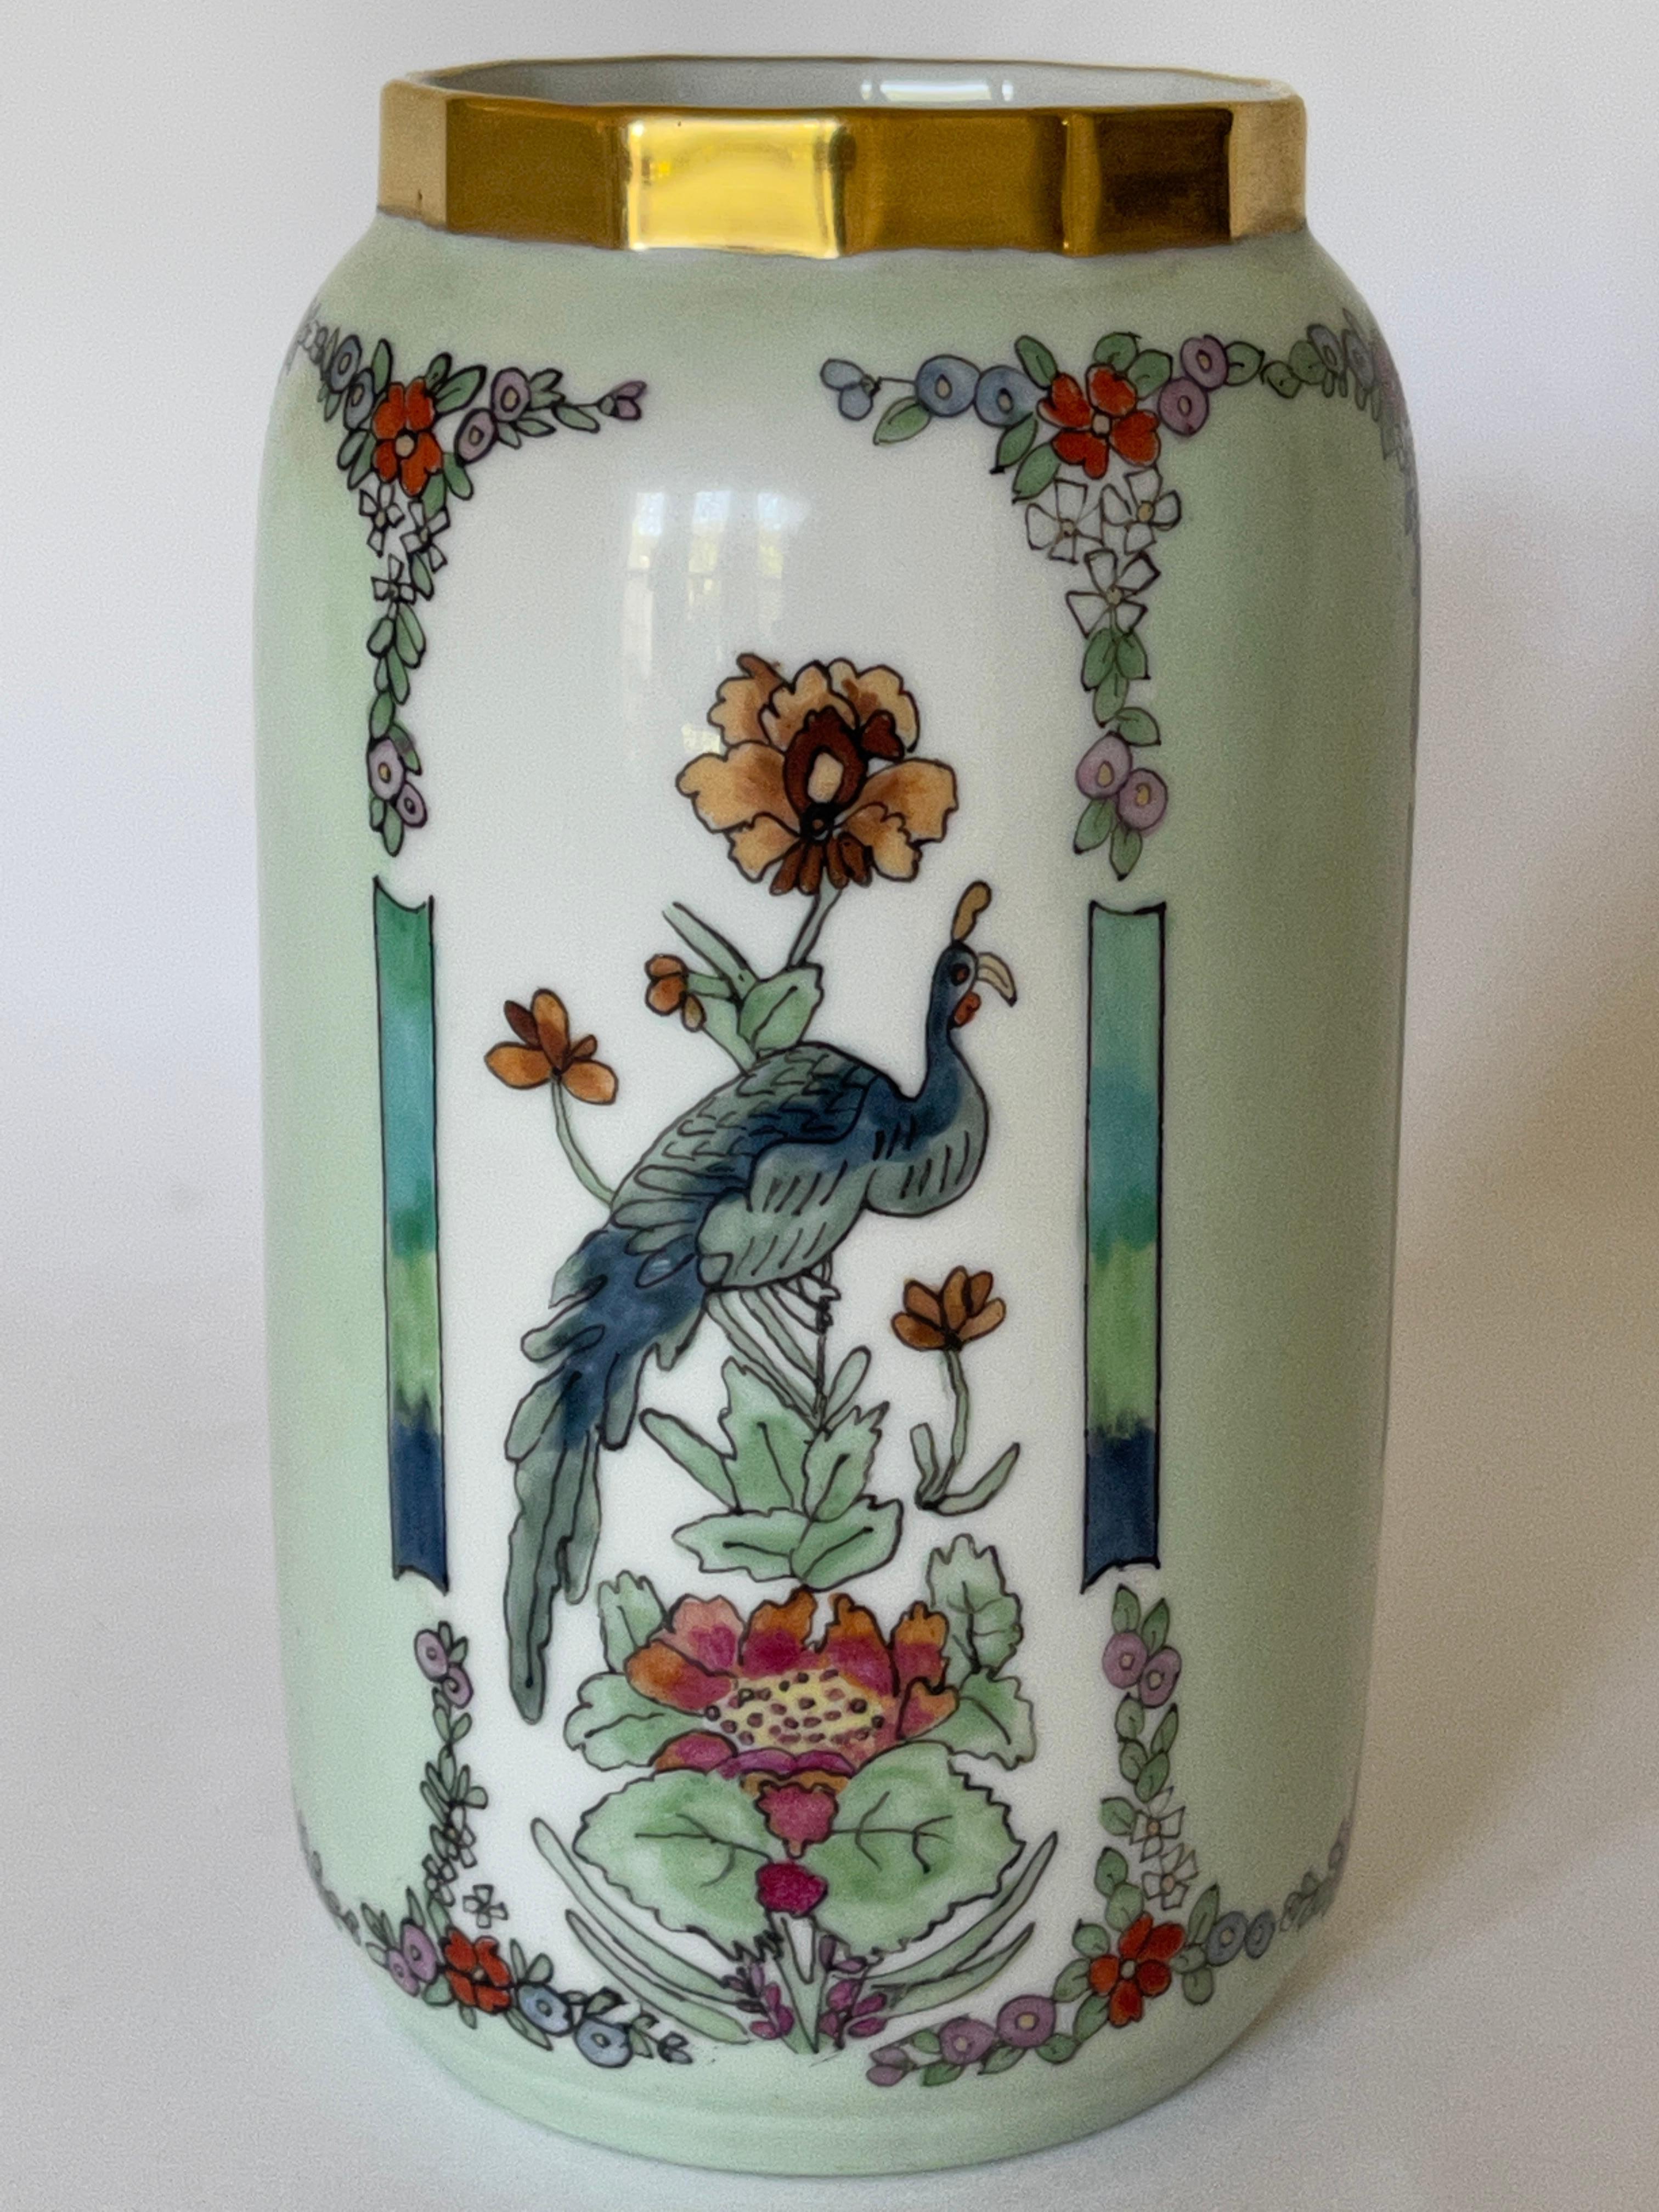 Art Deco Schonwald Bavaria vase, hand painted enameled vase with peacocks and floral motifs, exquisitely crafted. Signed on bottom with Schonwald factory mark that dates from 1919-1927., and impressed model number. 
Artist signed Ellsie